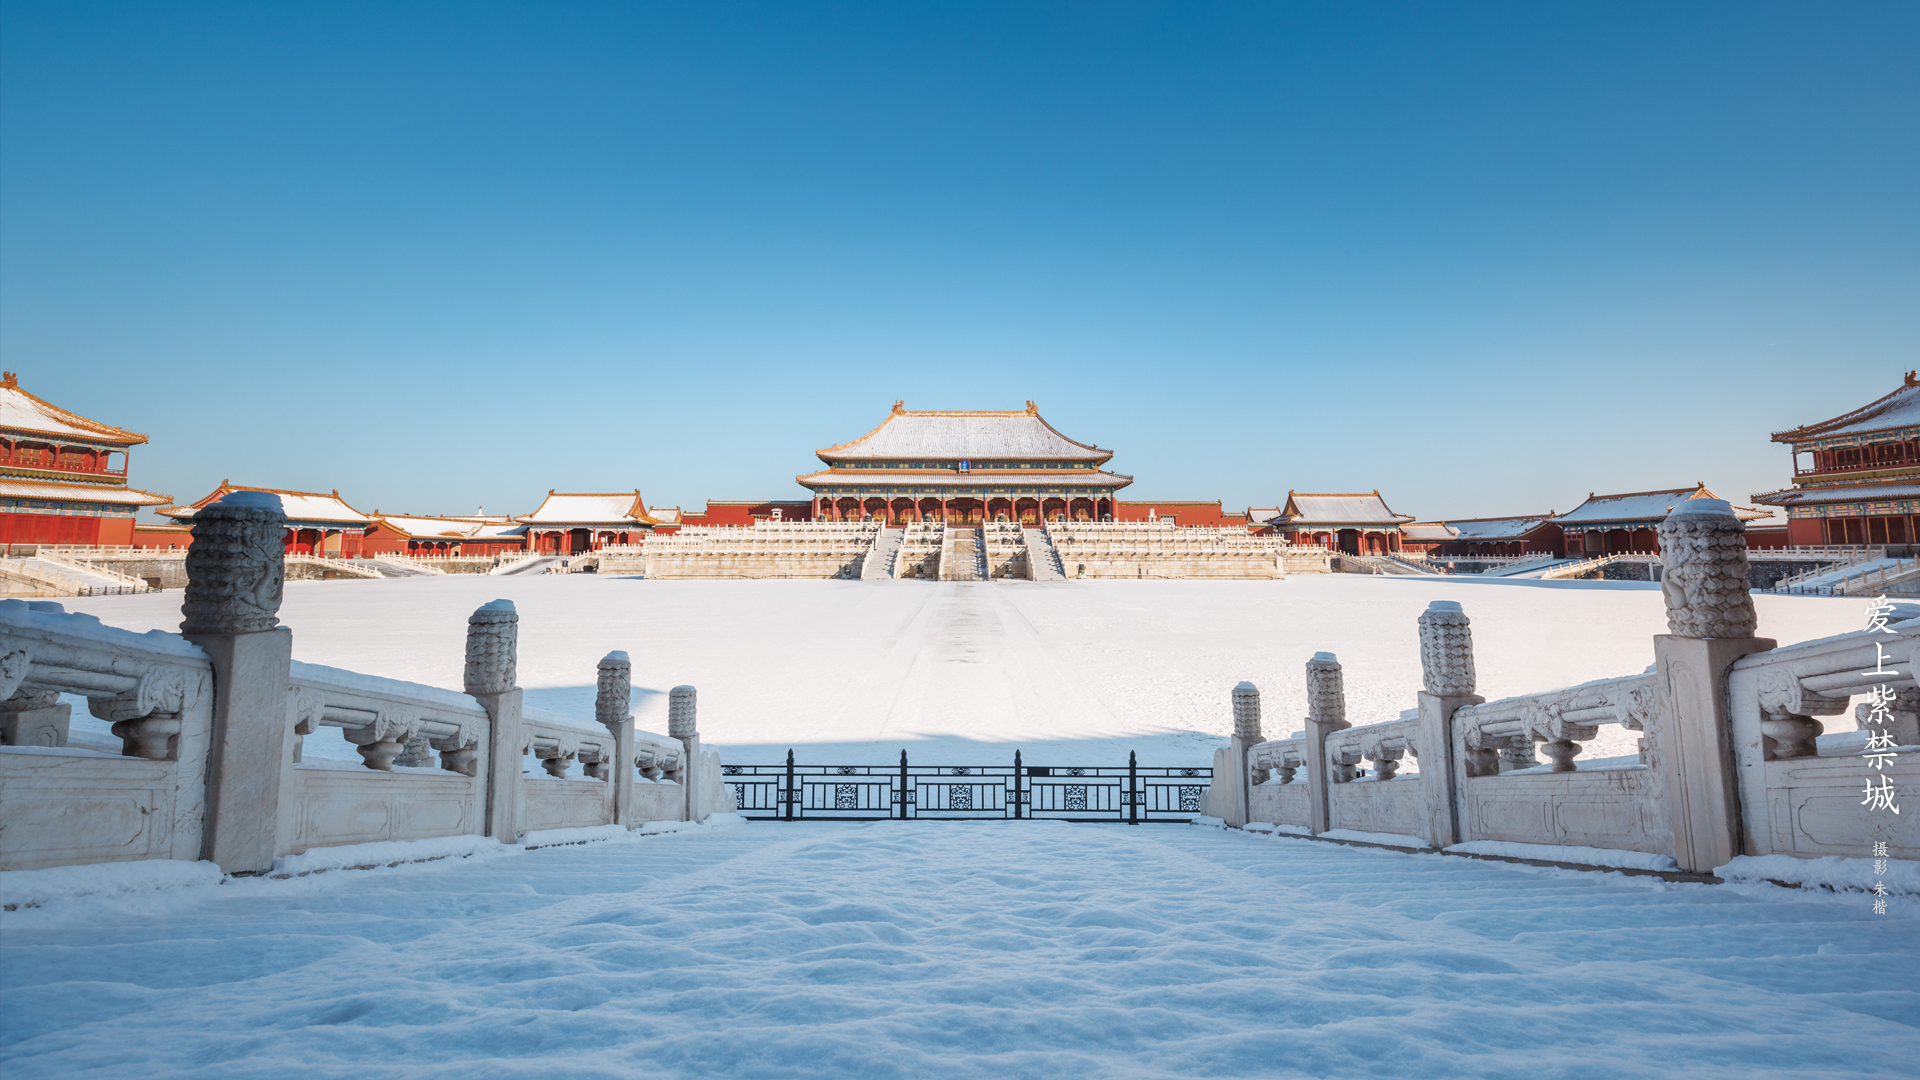 General 1920x1080 Chinese architecture snow The Imperial Palace architecture